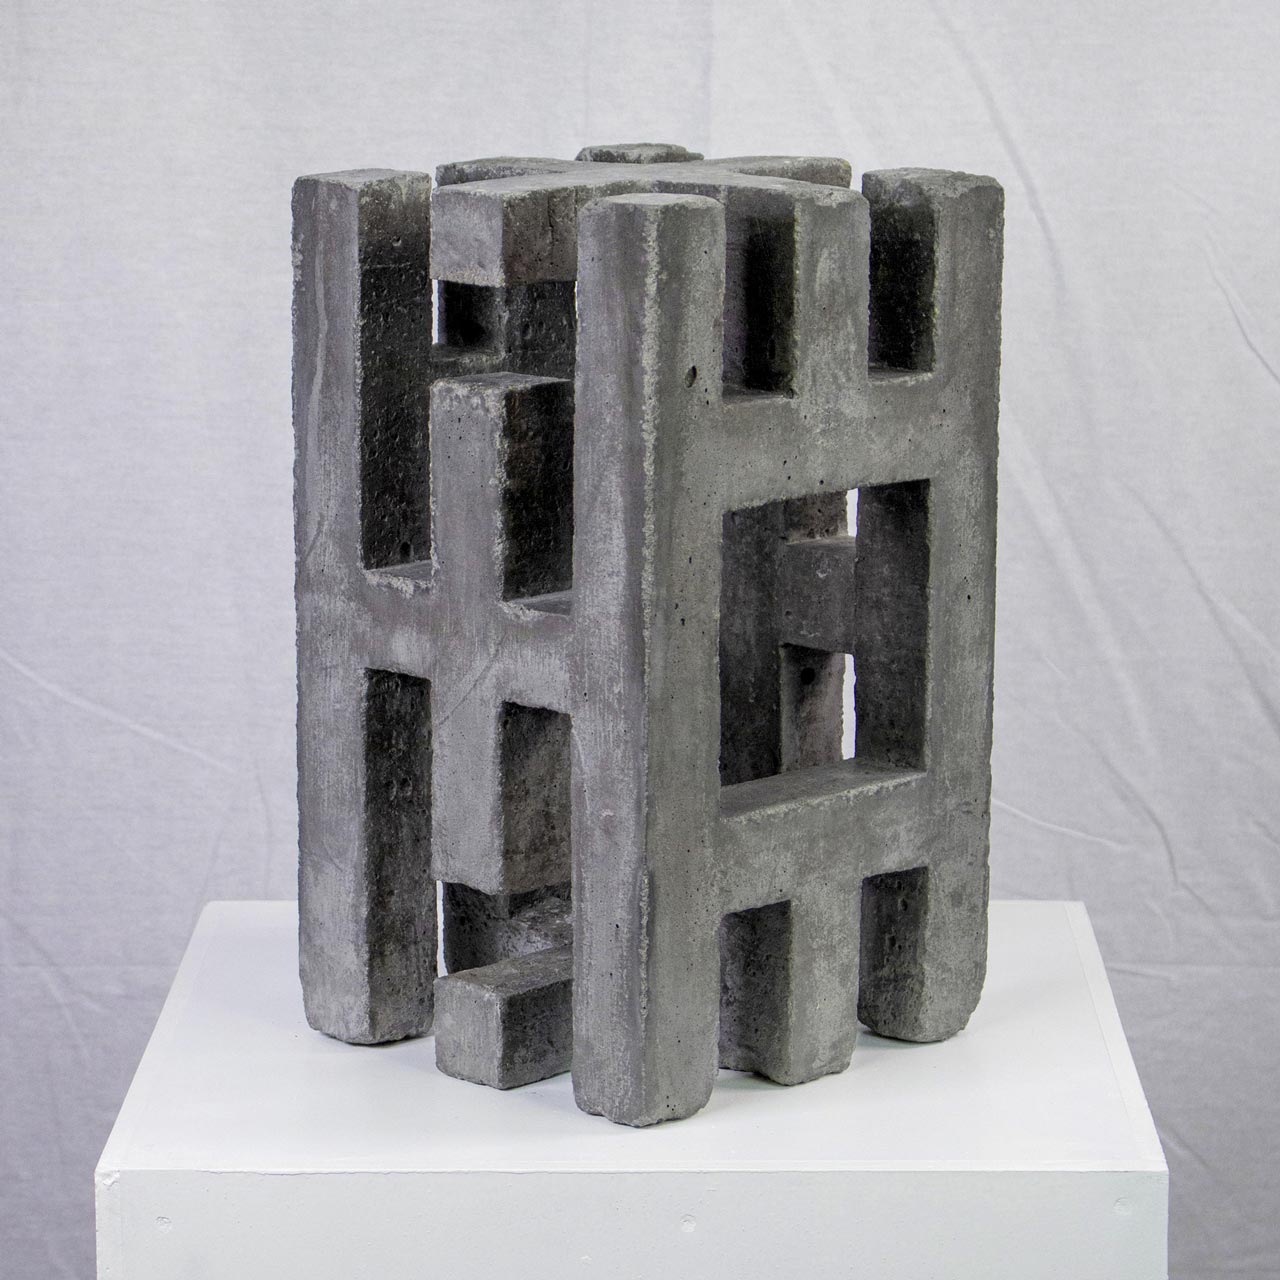 Photograph of geometric sculpture made of concrete